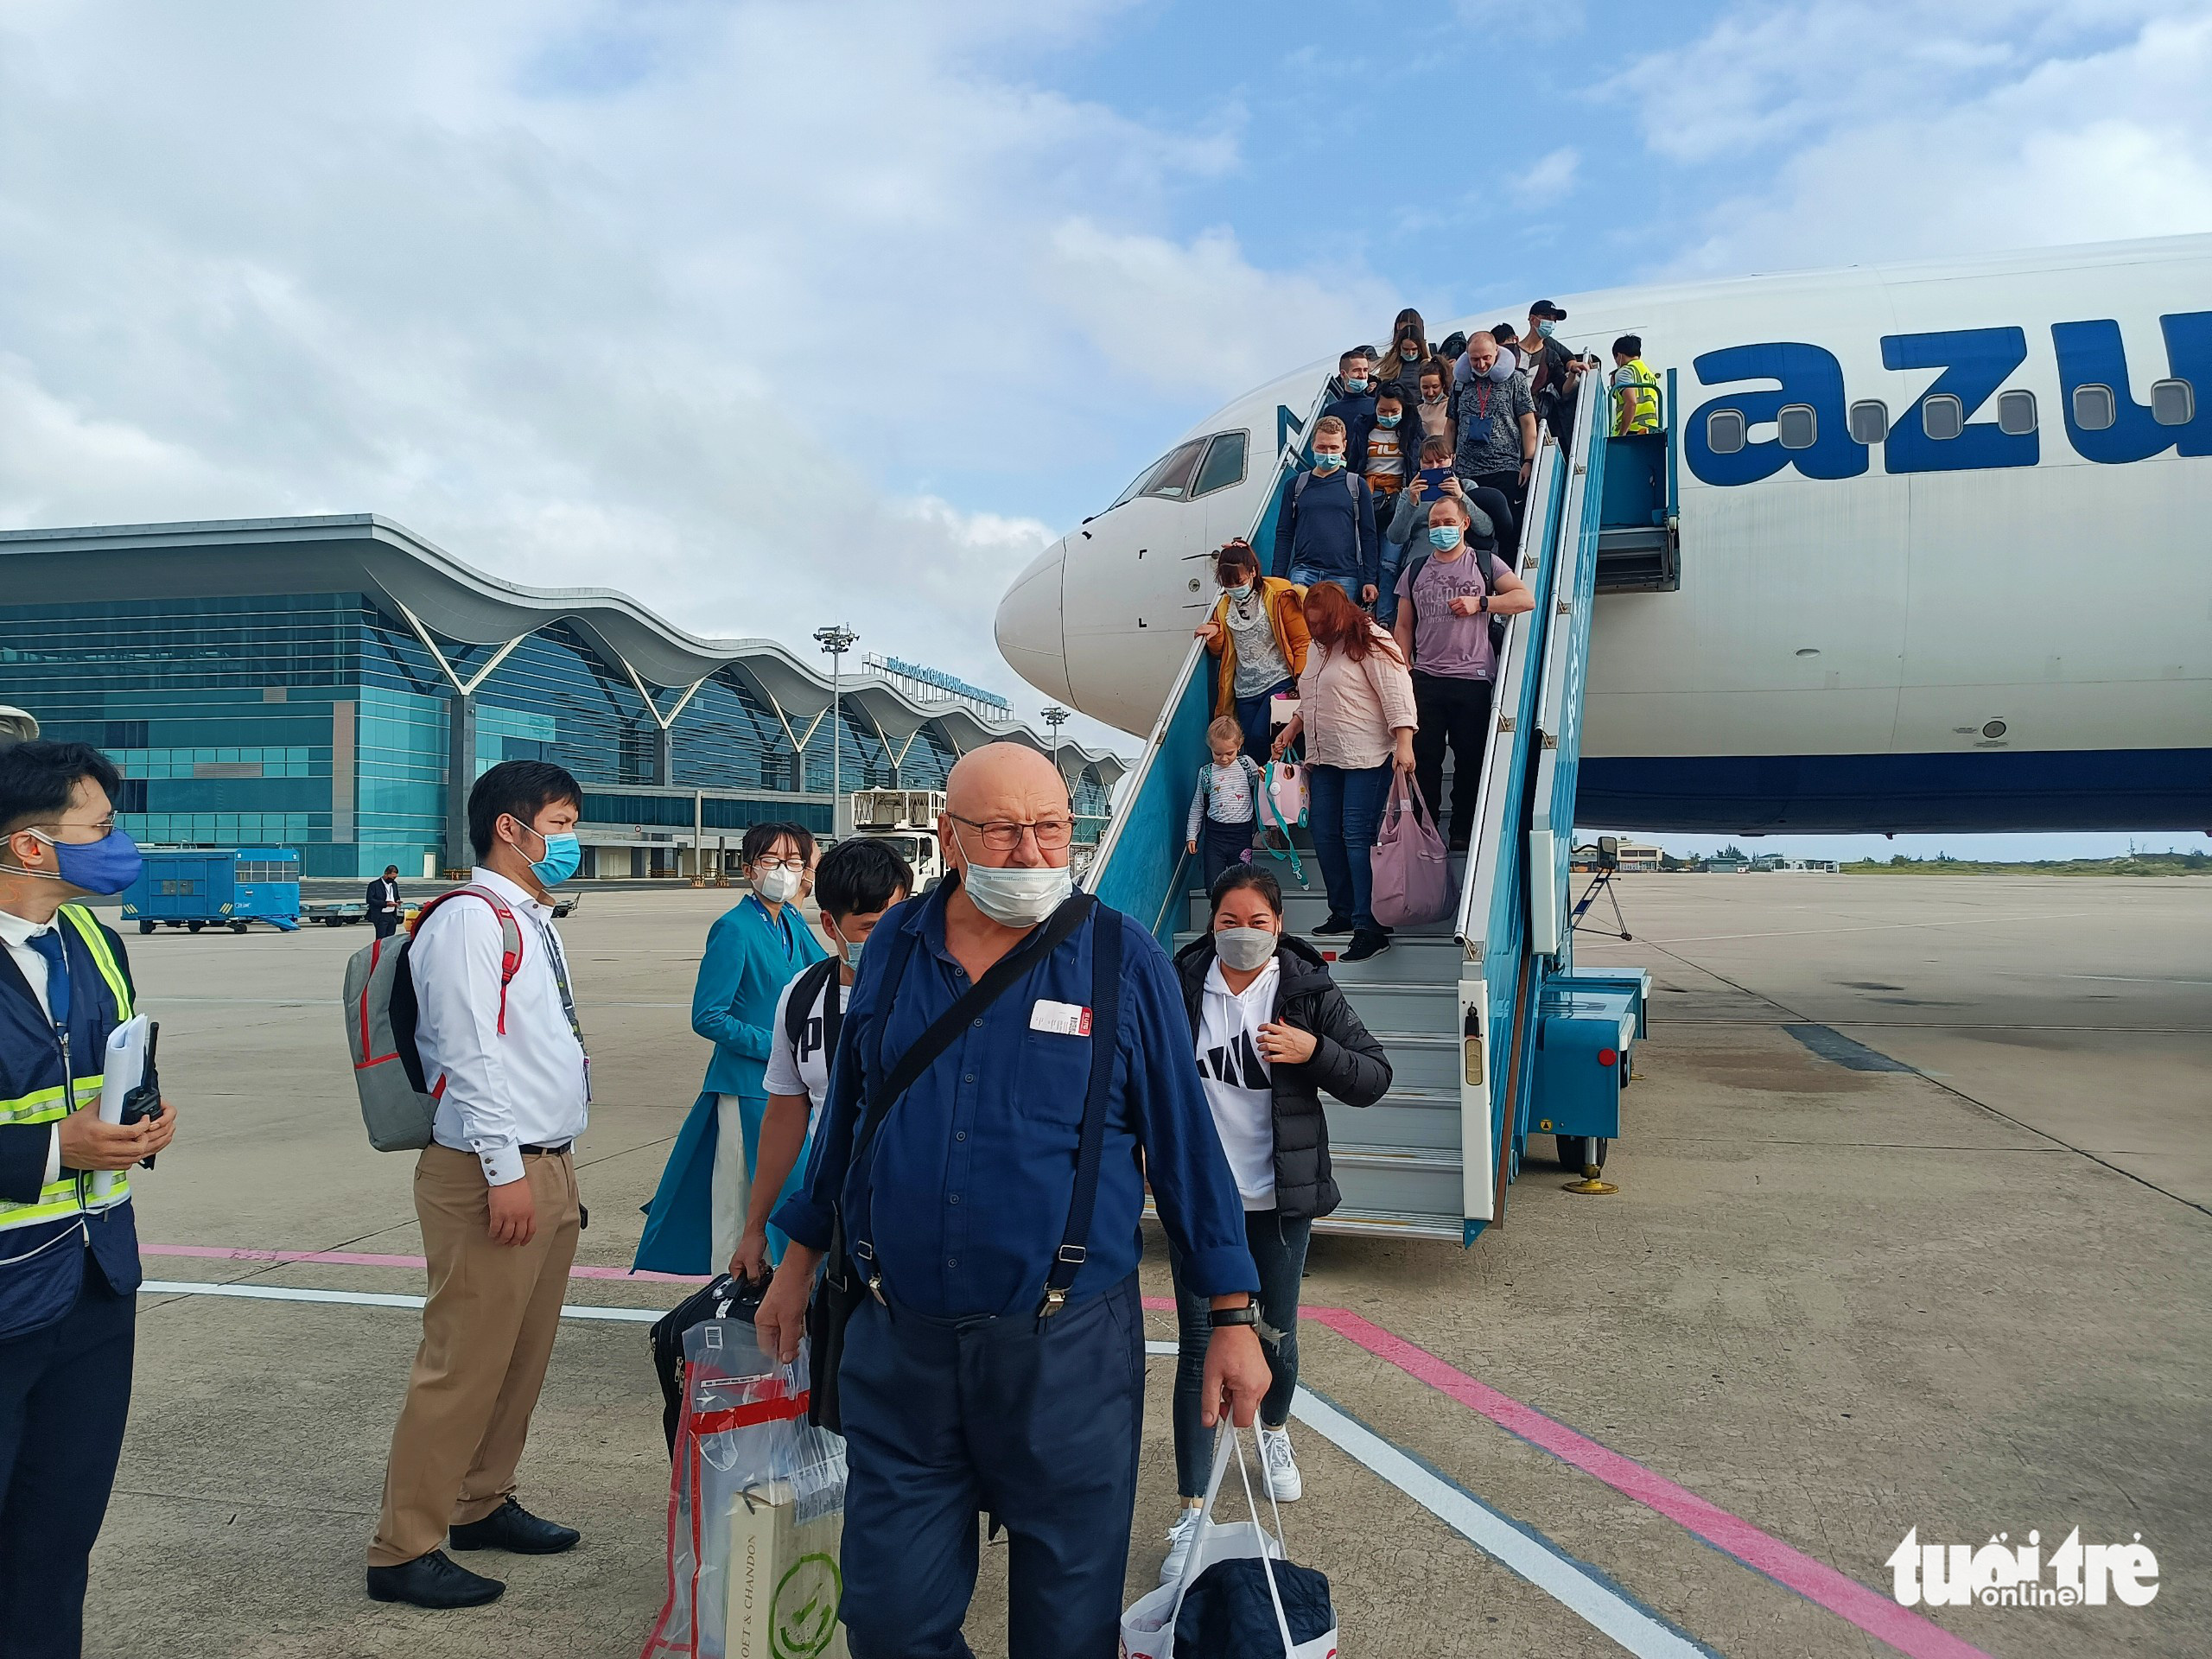 Russian tourists arrive at Cam Ranh International Airport in Khanh Hoa Province, Vietnam, December 26, 2021. Photo: Minh Chien / Tuoi Tre